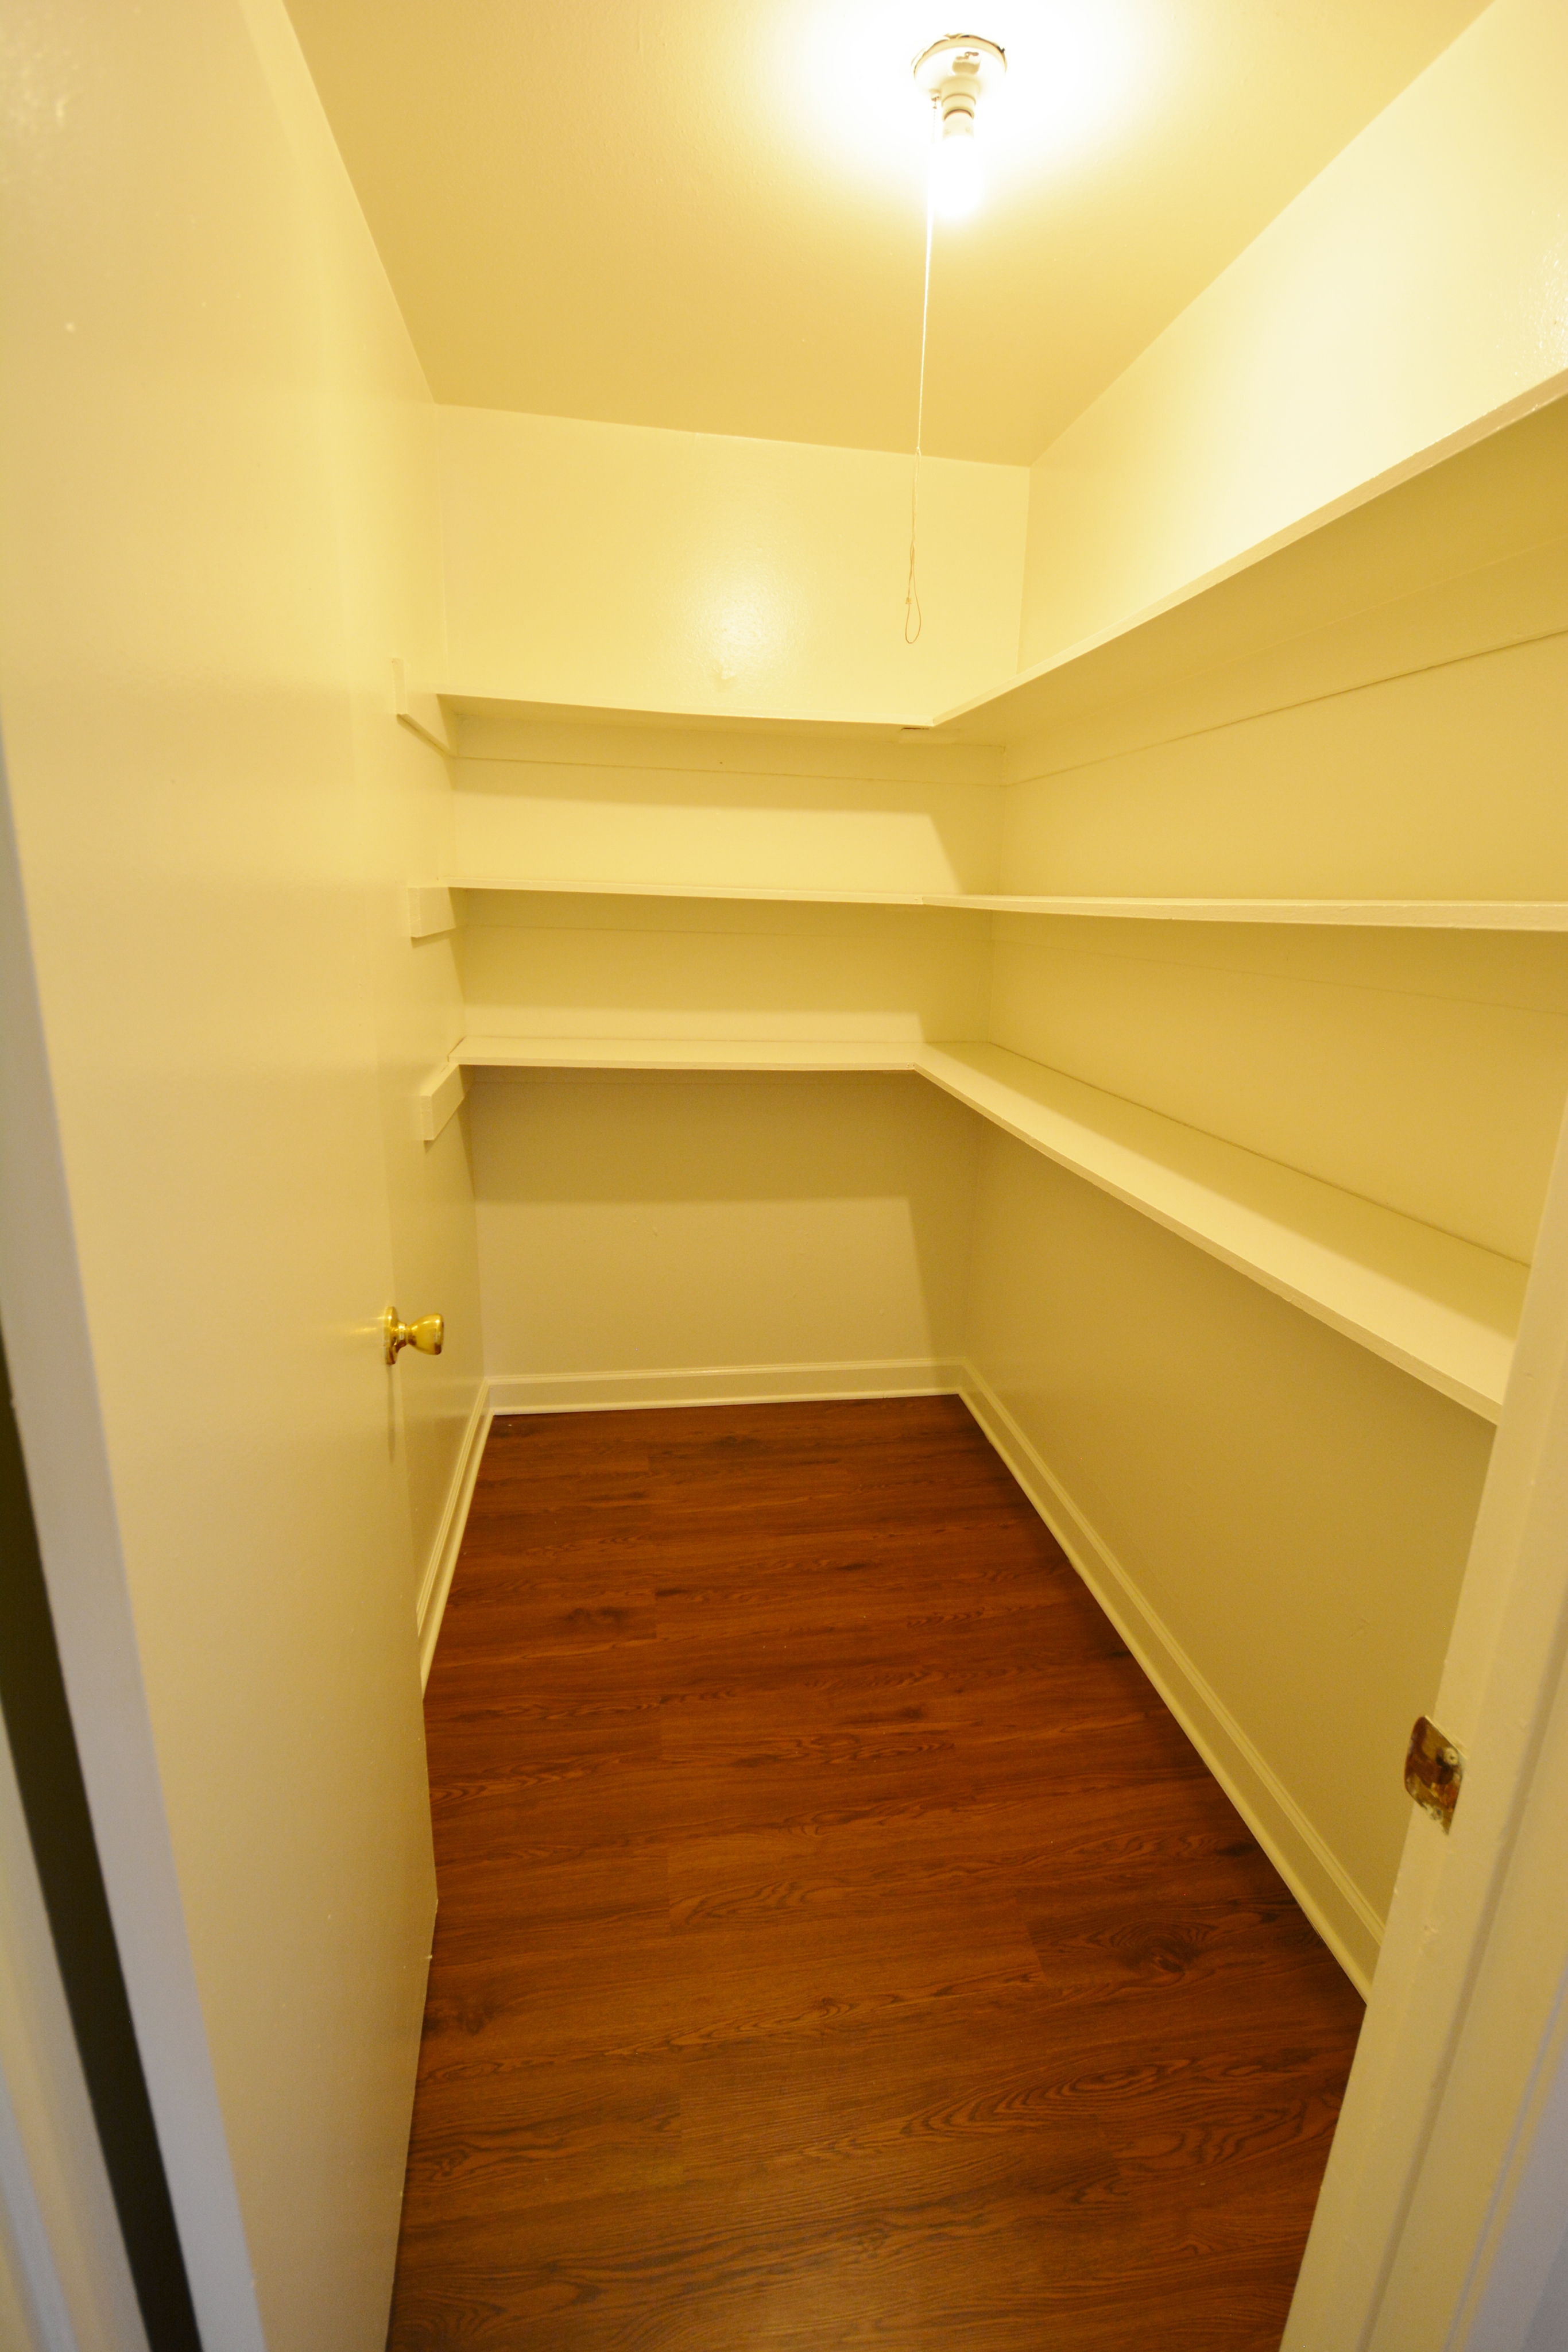 Closet Storage Space | Apartments Homes for rent in Fort Campbell, KY | Campbell Crossing